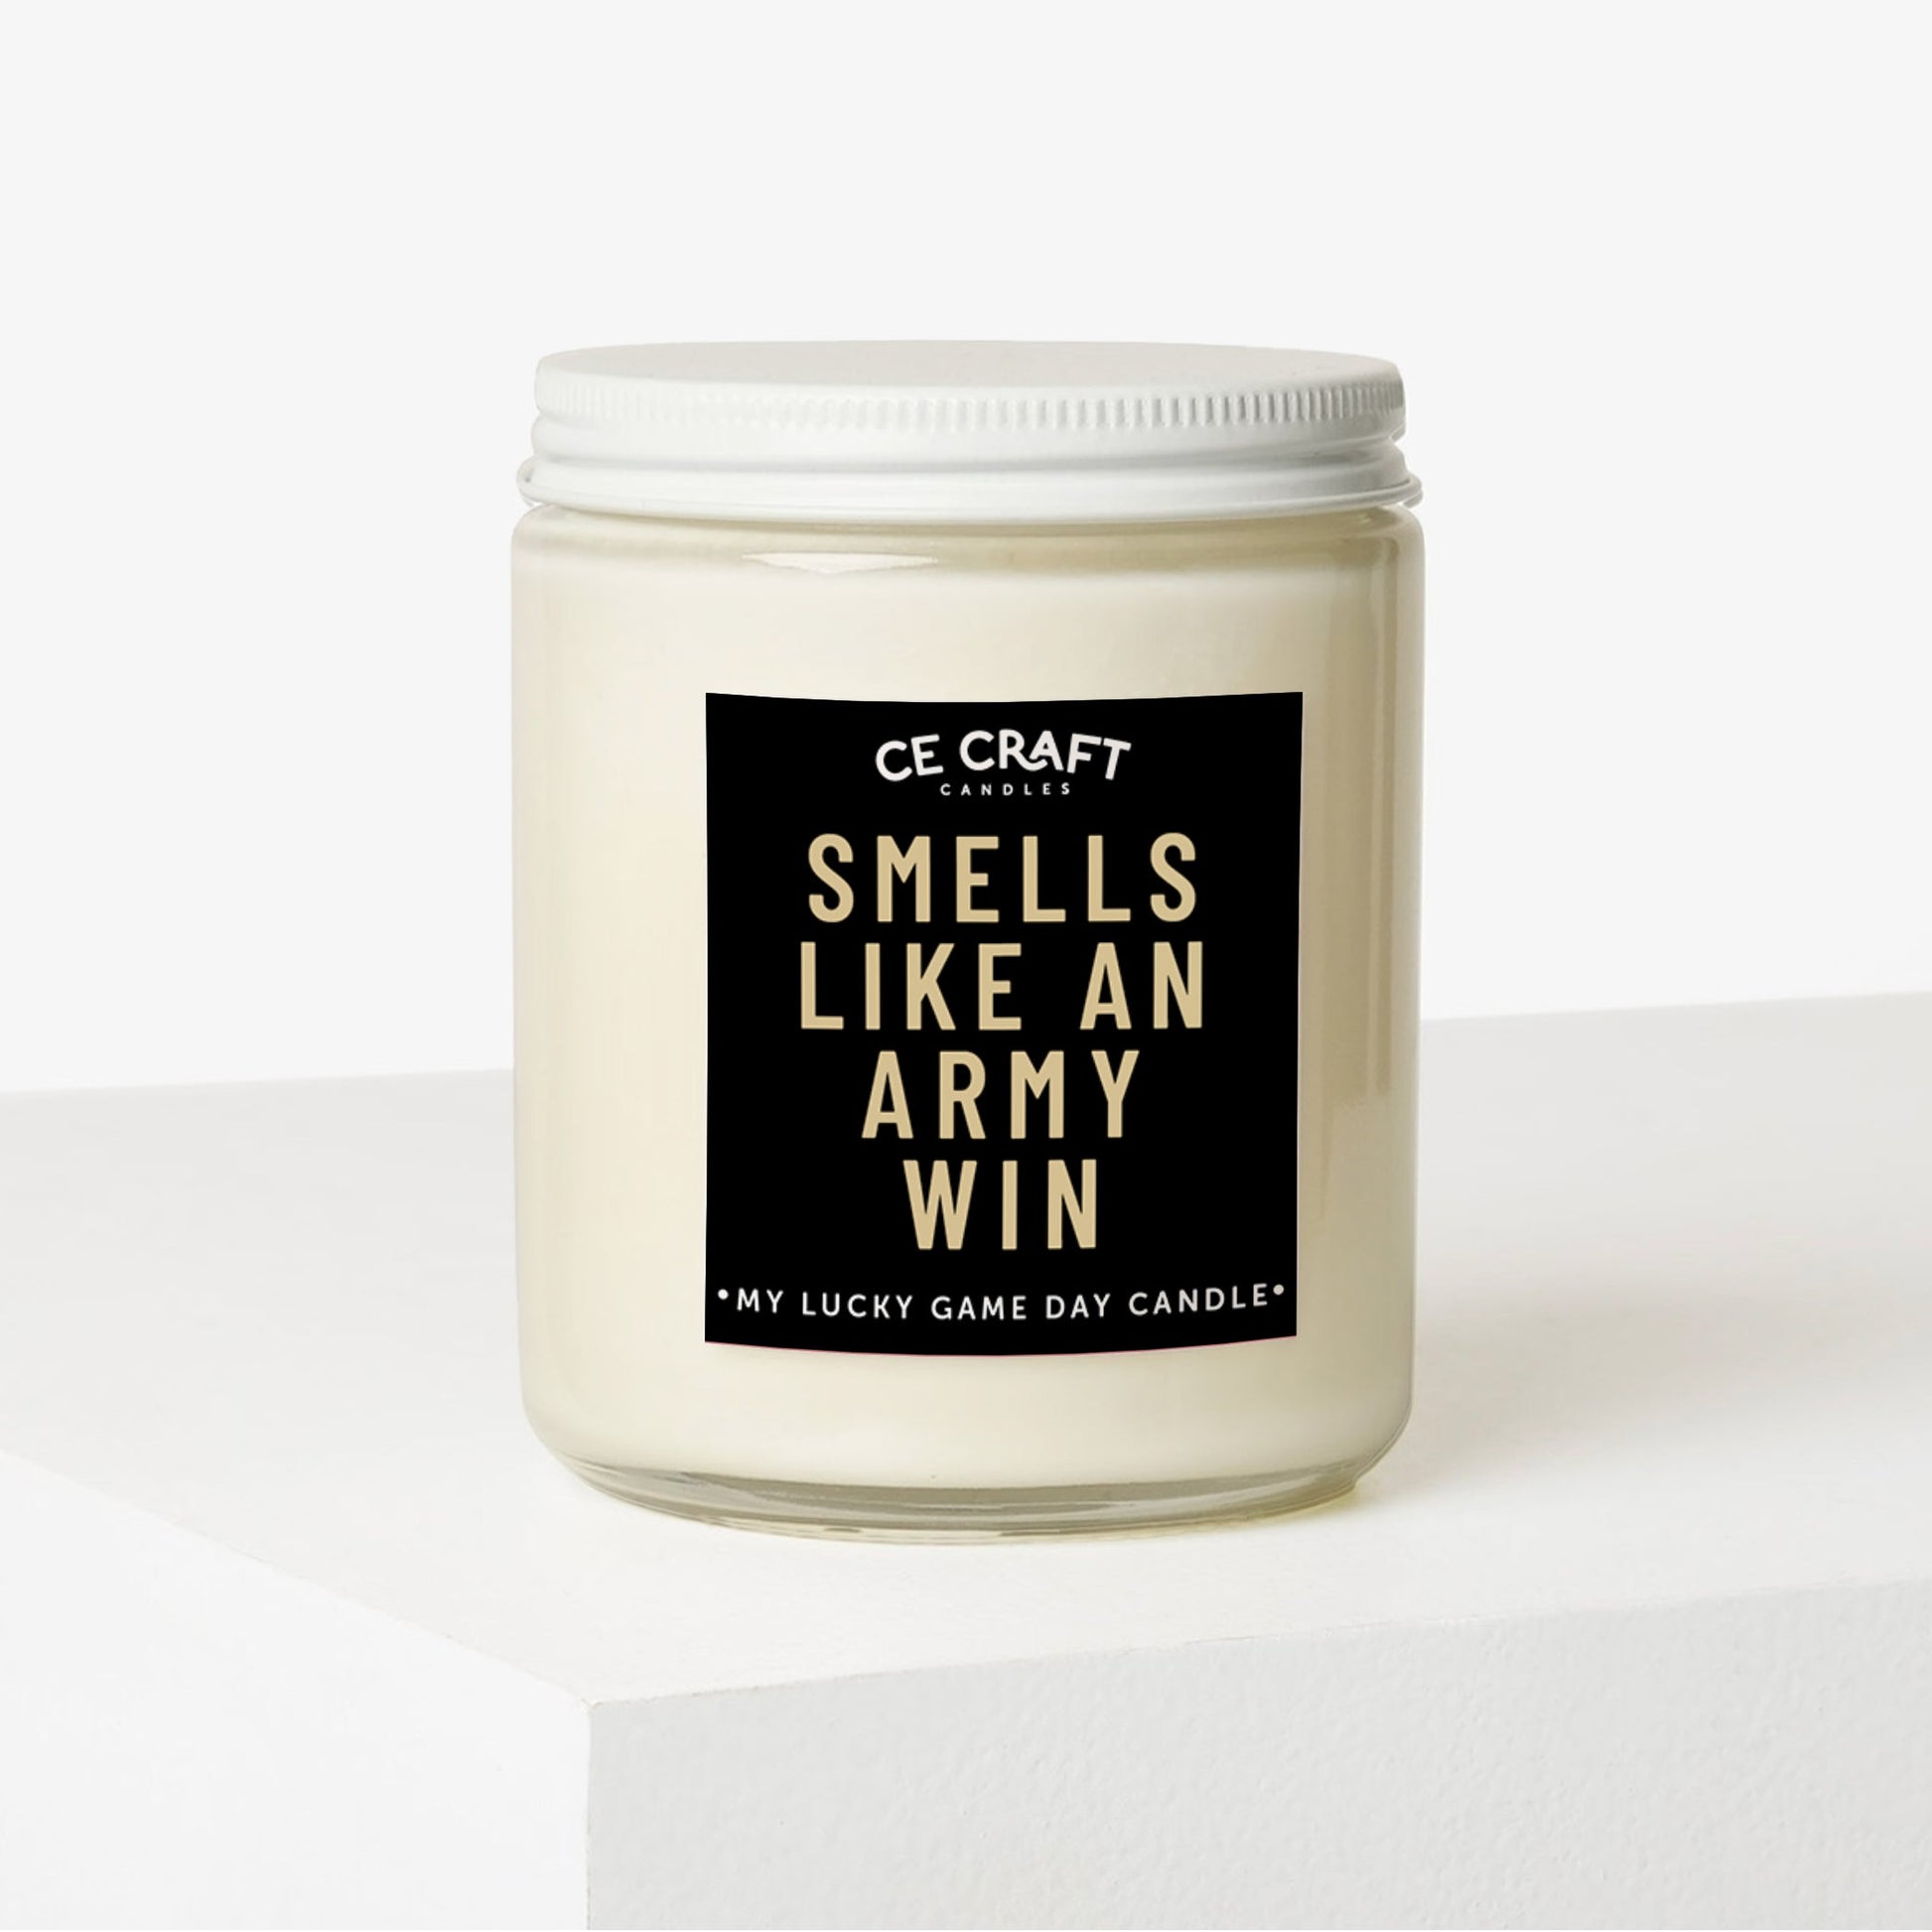 Smells Like An Army Win Scented Candle Candles CE Craft 